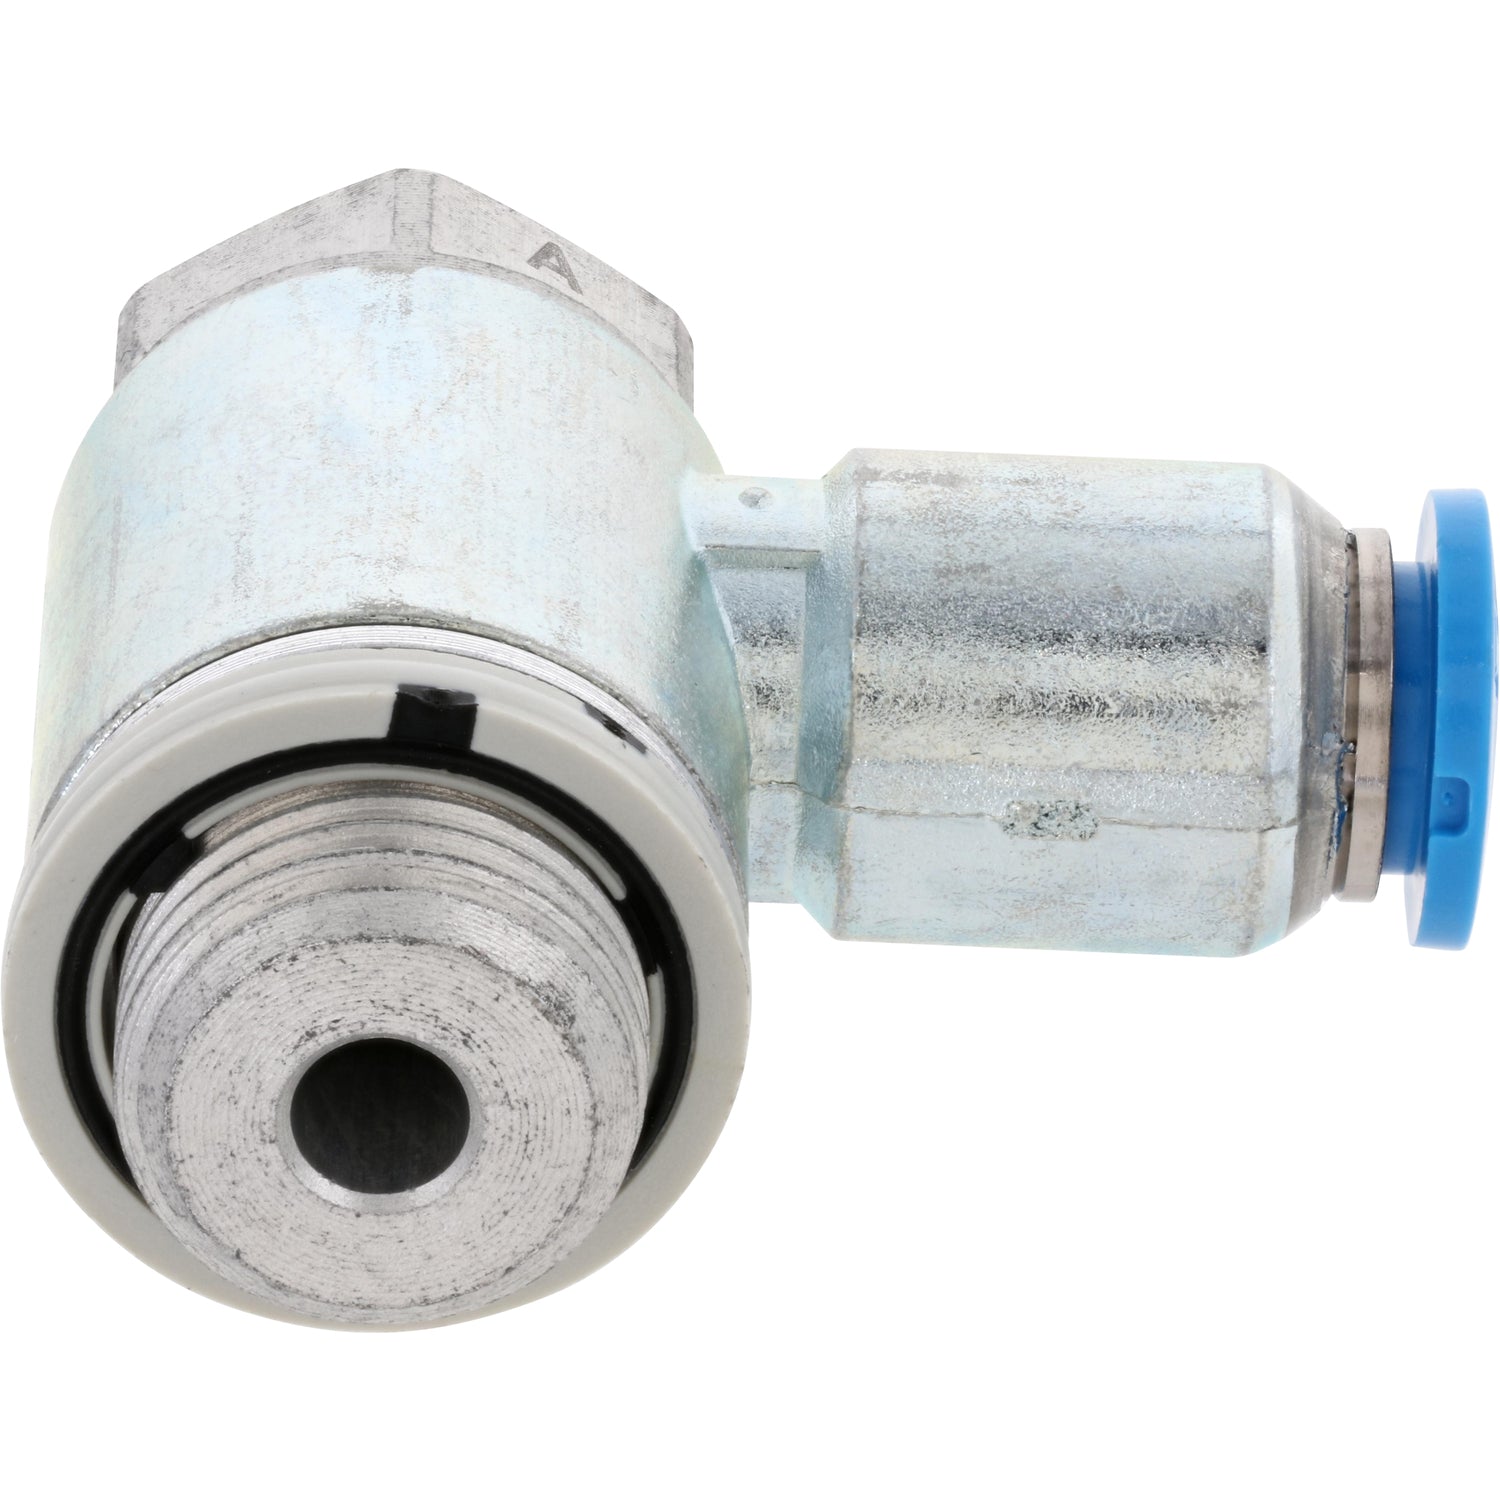 One-way flow control valve with blue press connect collar and exposed threads. Part shown on white background. 